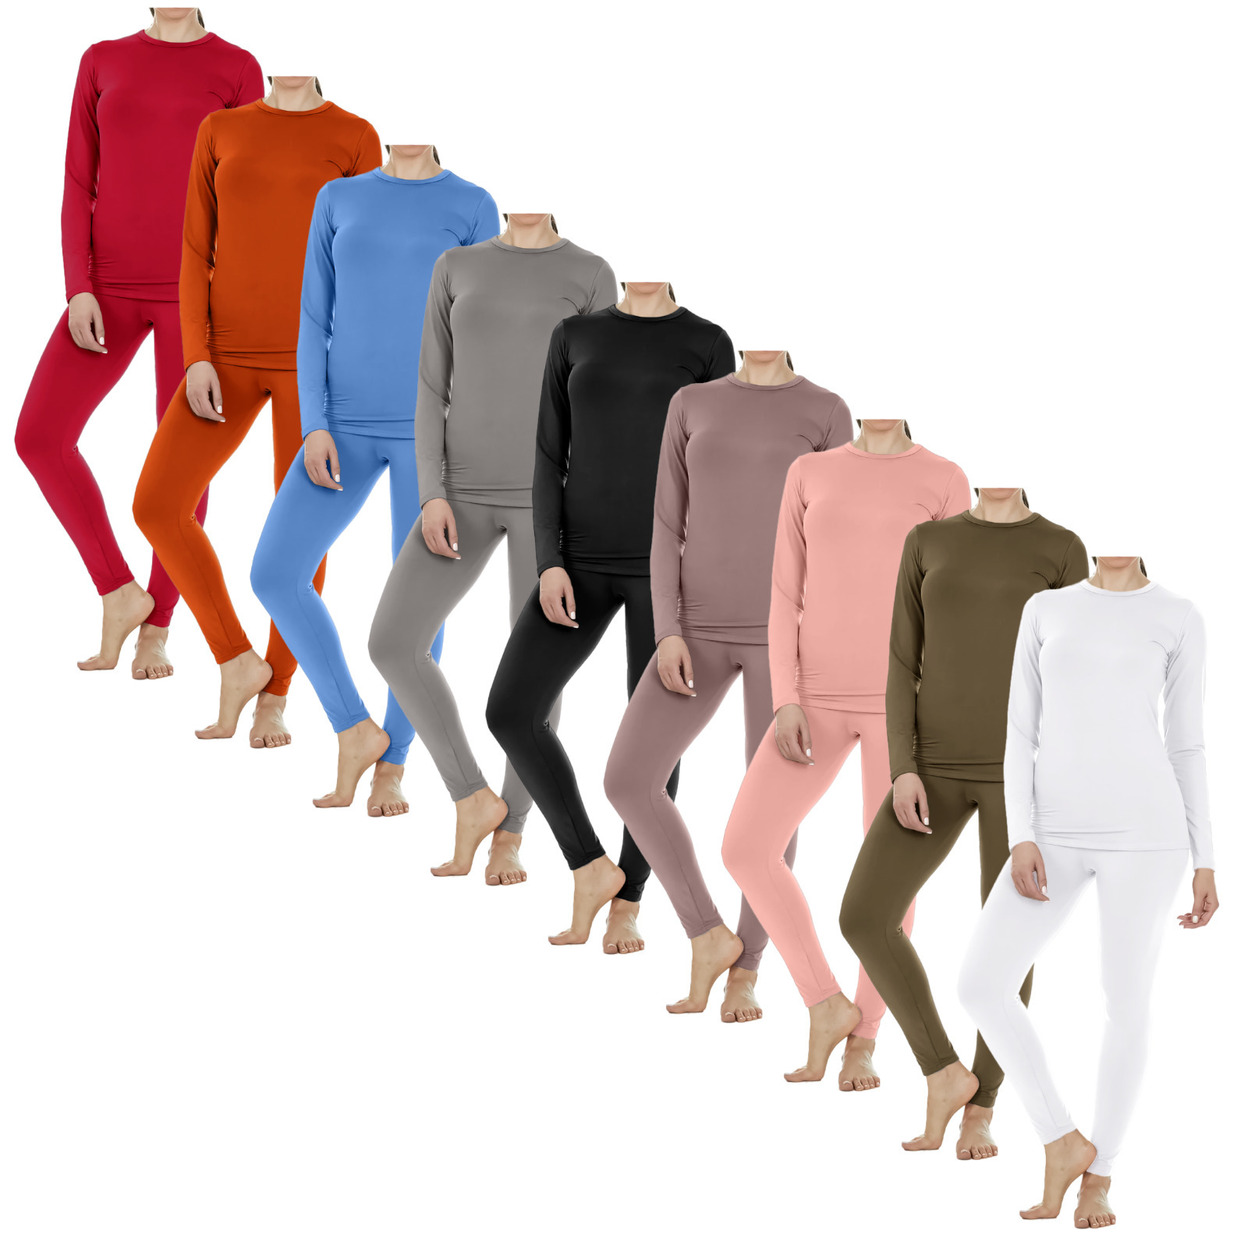 2-Set: Women's Fleece Lined Winter Warm Soft Thermal Sets For Cold Weather - Black&red, Medium